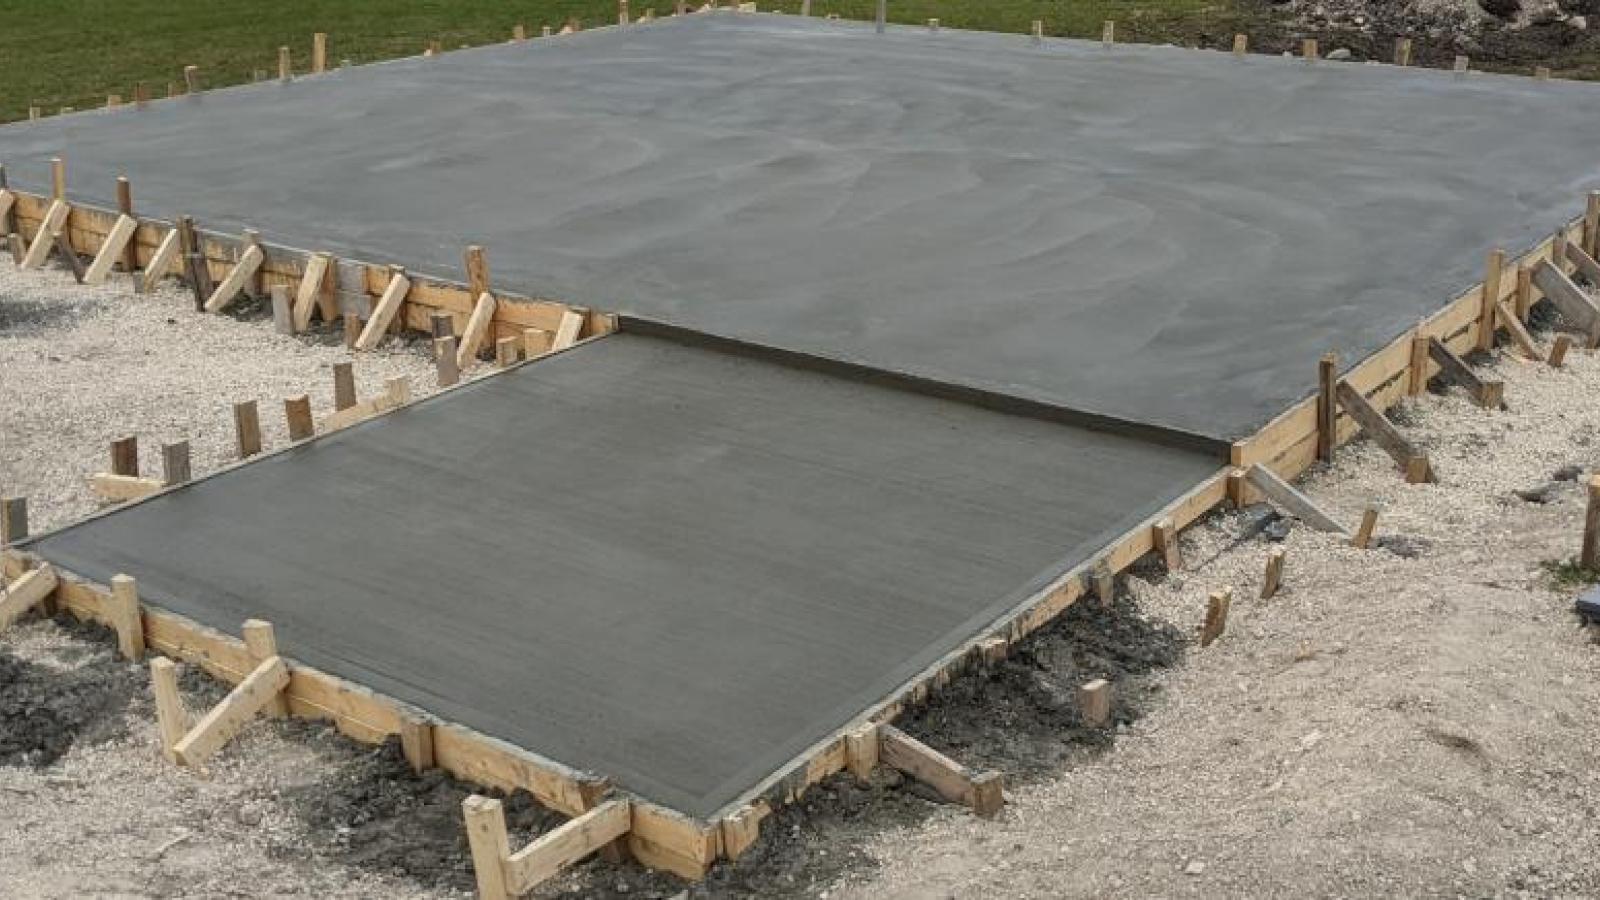 Concrete contractor for forming and finishing pads